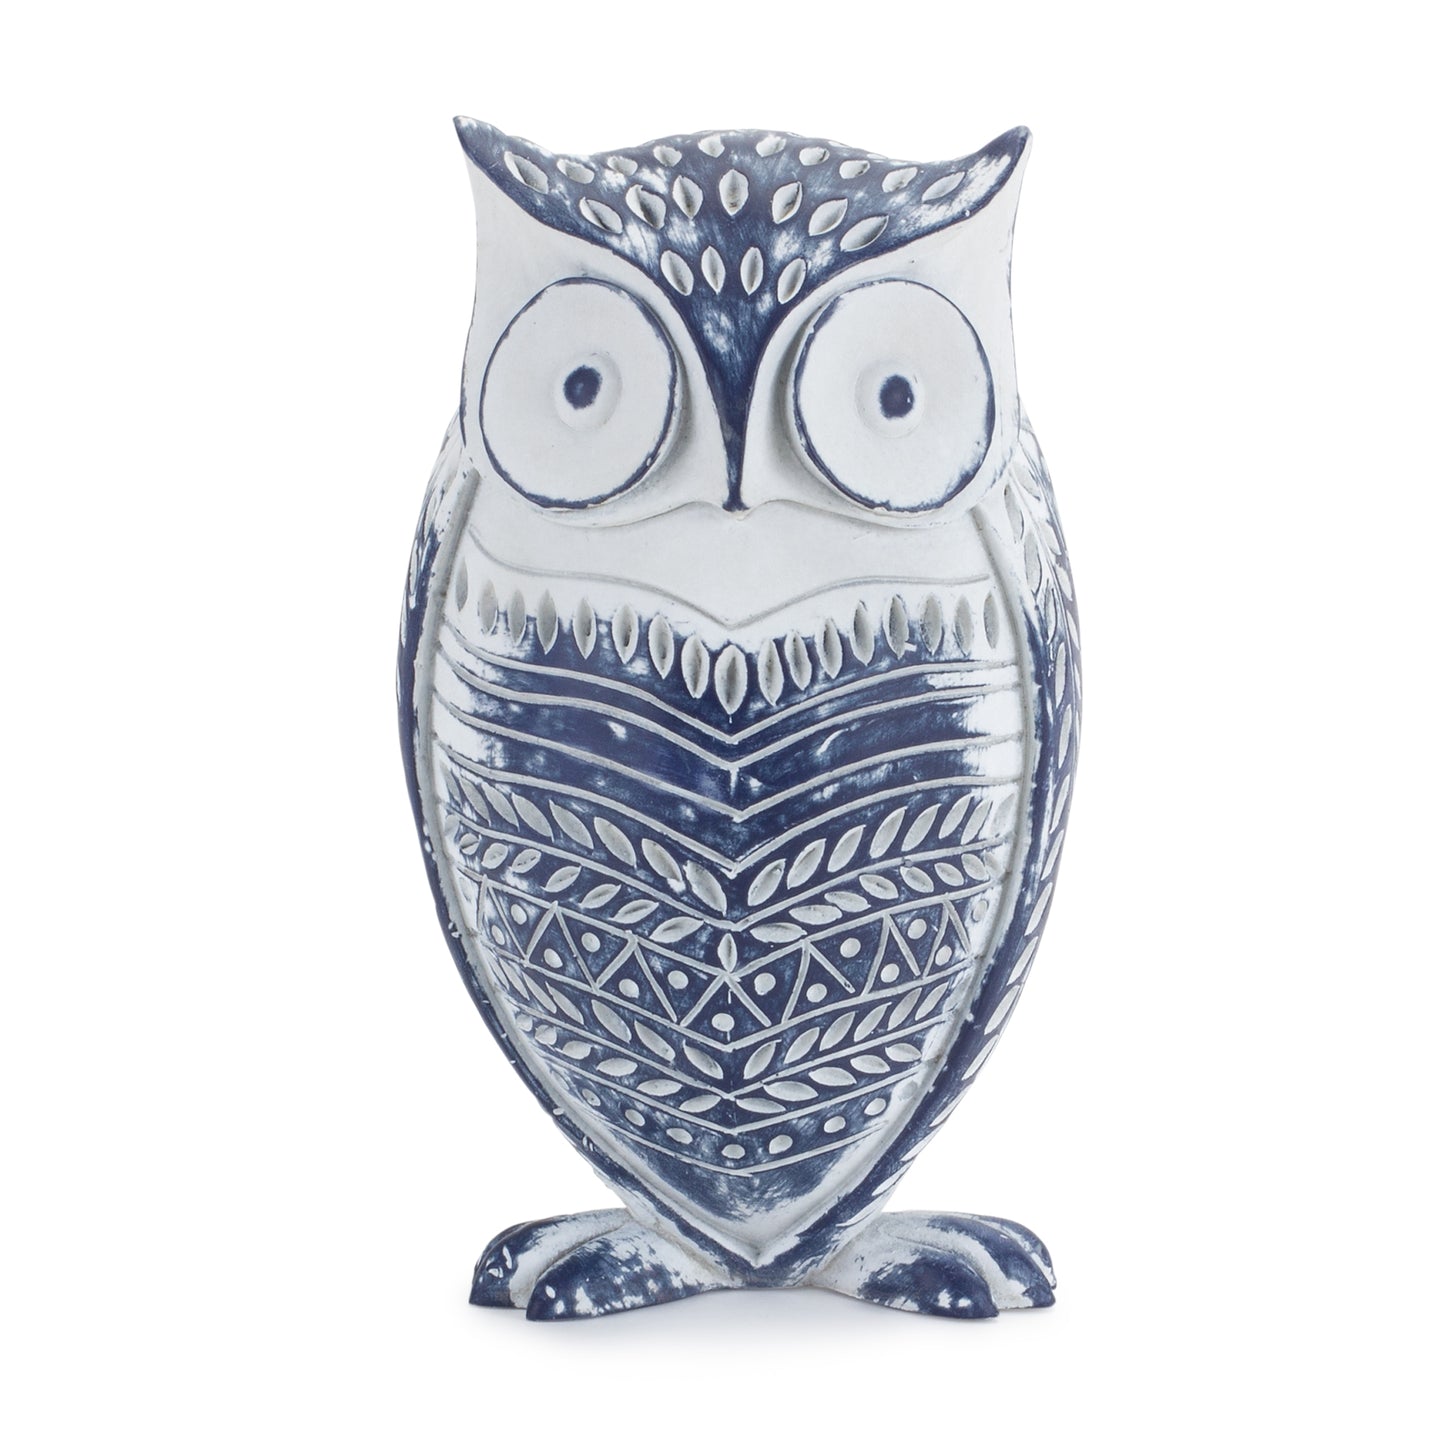 White Washed Owl Décor with Blue Floral Design 6.5"H